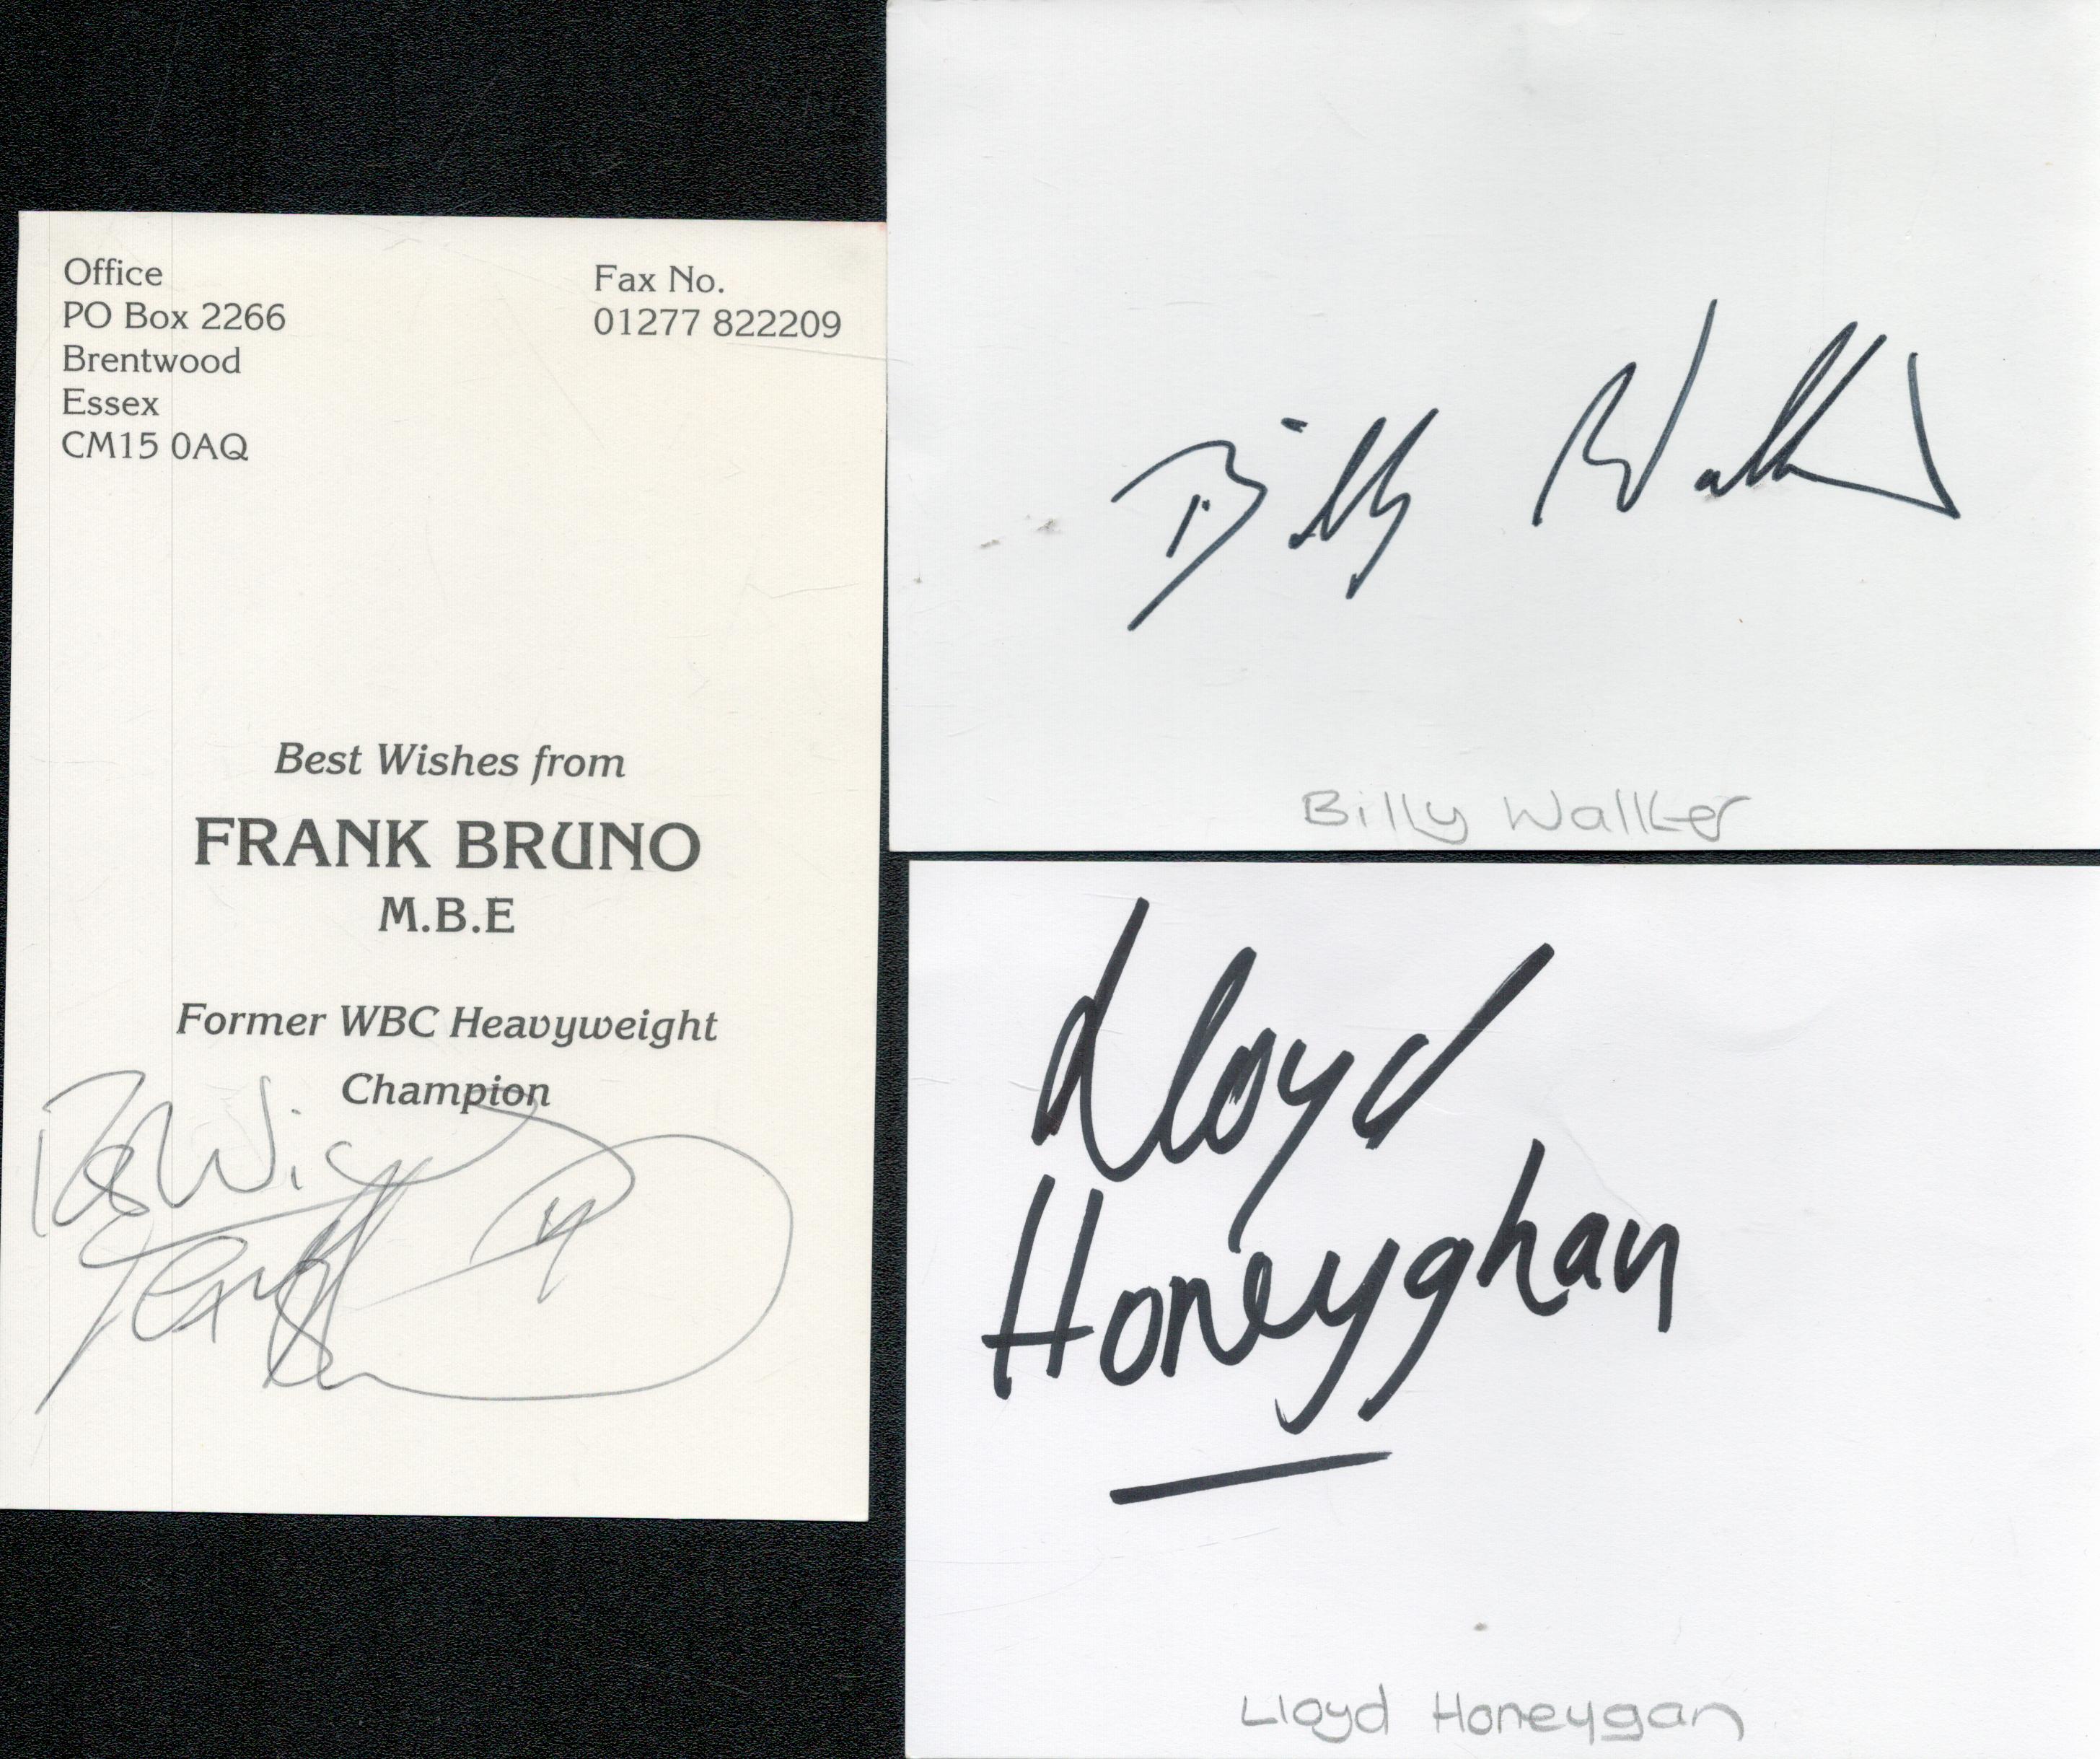 Boxing collection of 6 signed photos and cards including names of Lloyd Honeyghan, Billy Walker, Sir - Image 2 of 2